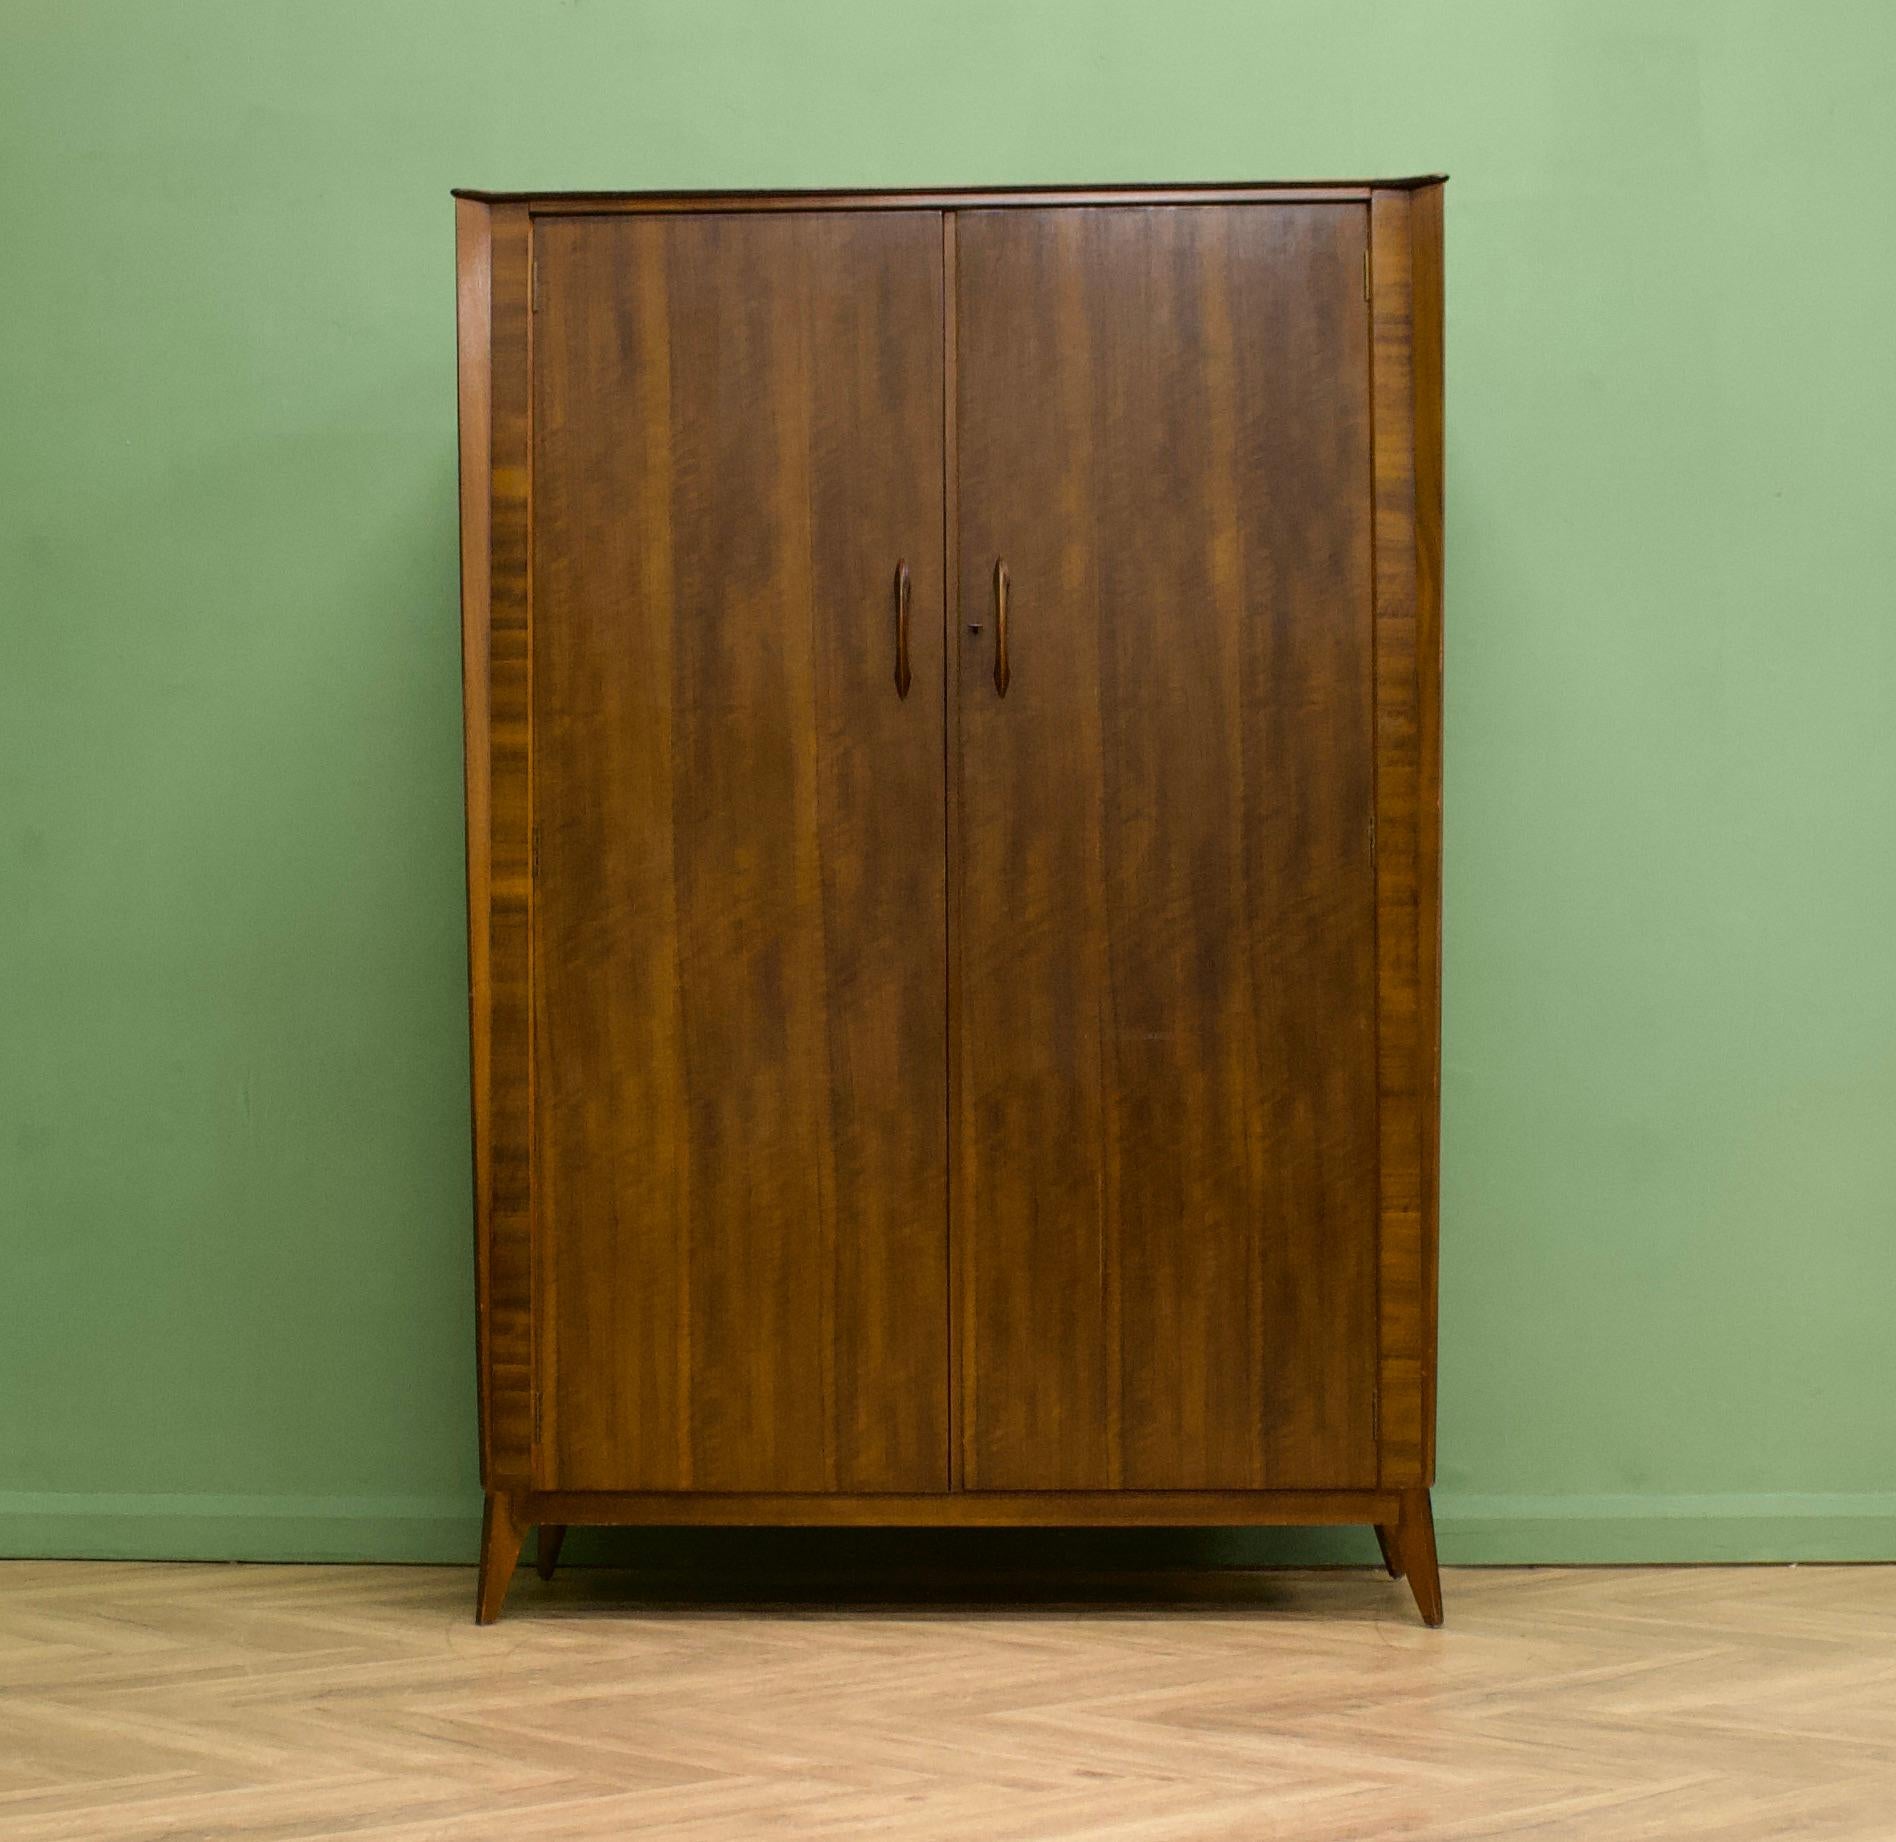 A walnut wardrobe from Waring and Gillow, circa 1950s
They were possibly one of the last pieces of furniture off the Lancaster factory's production line - before the company were taken over and the factory closed

It stands on splayed tapered legs -